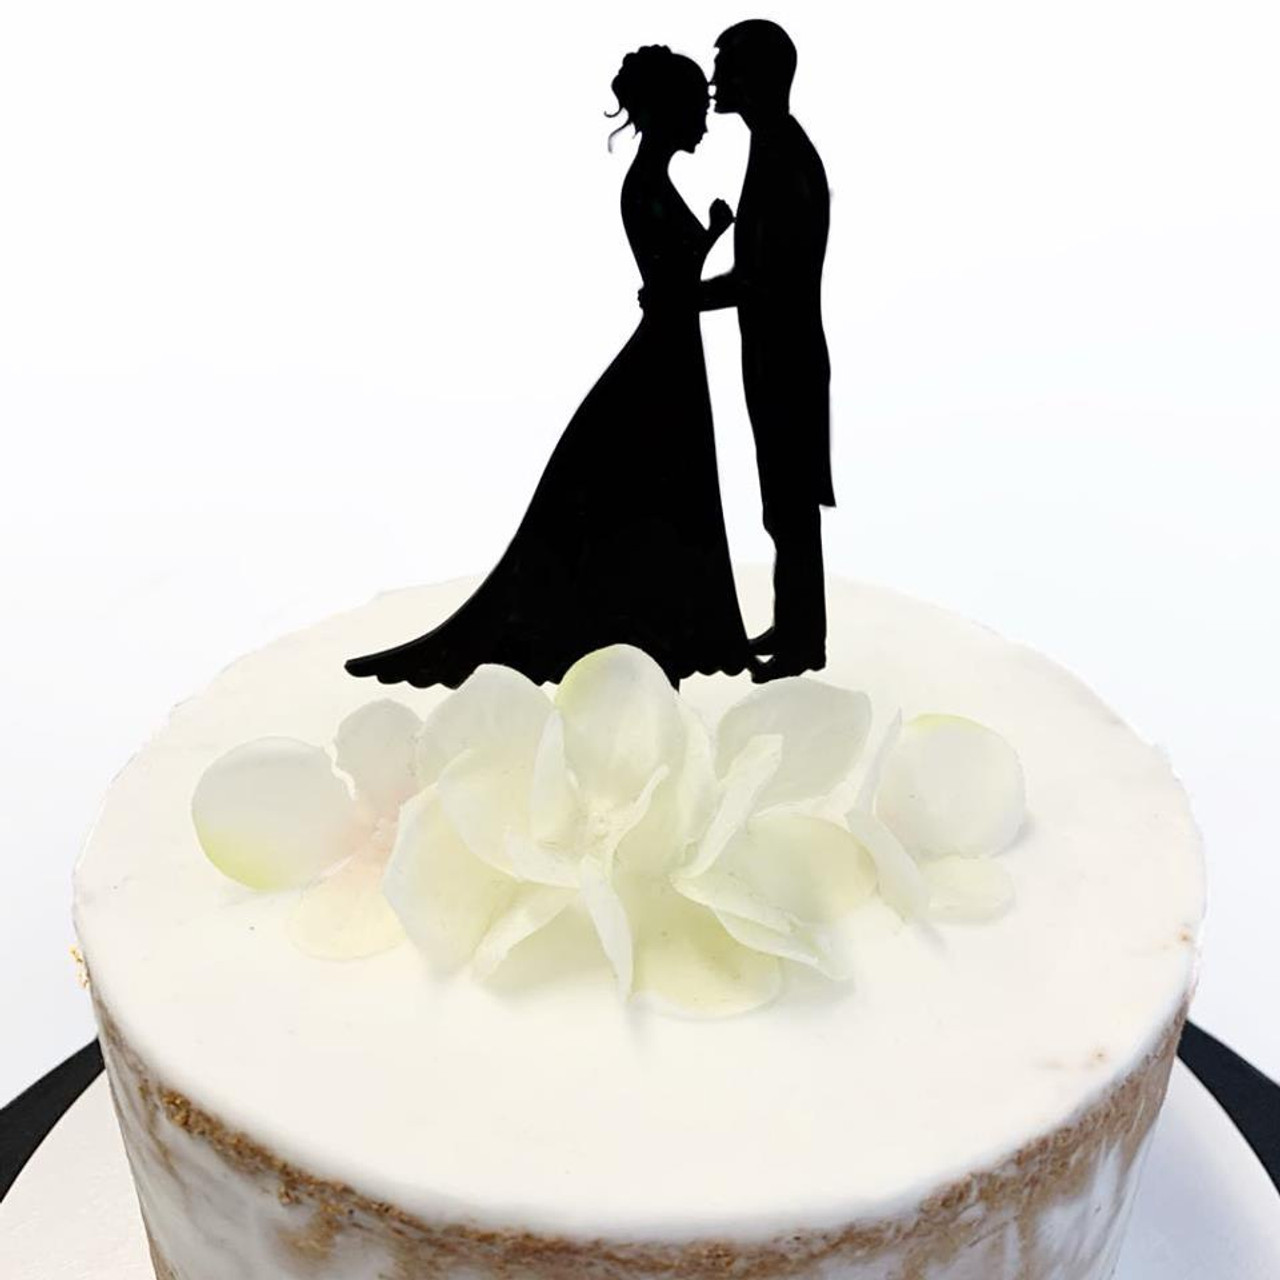 Engagement Cake Topper - Engaged Cake Topper Manufacturer from Mumbai